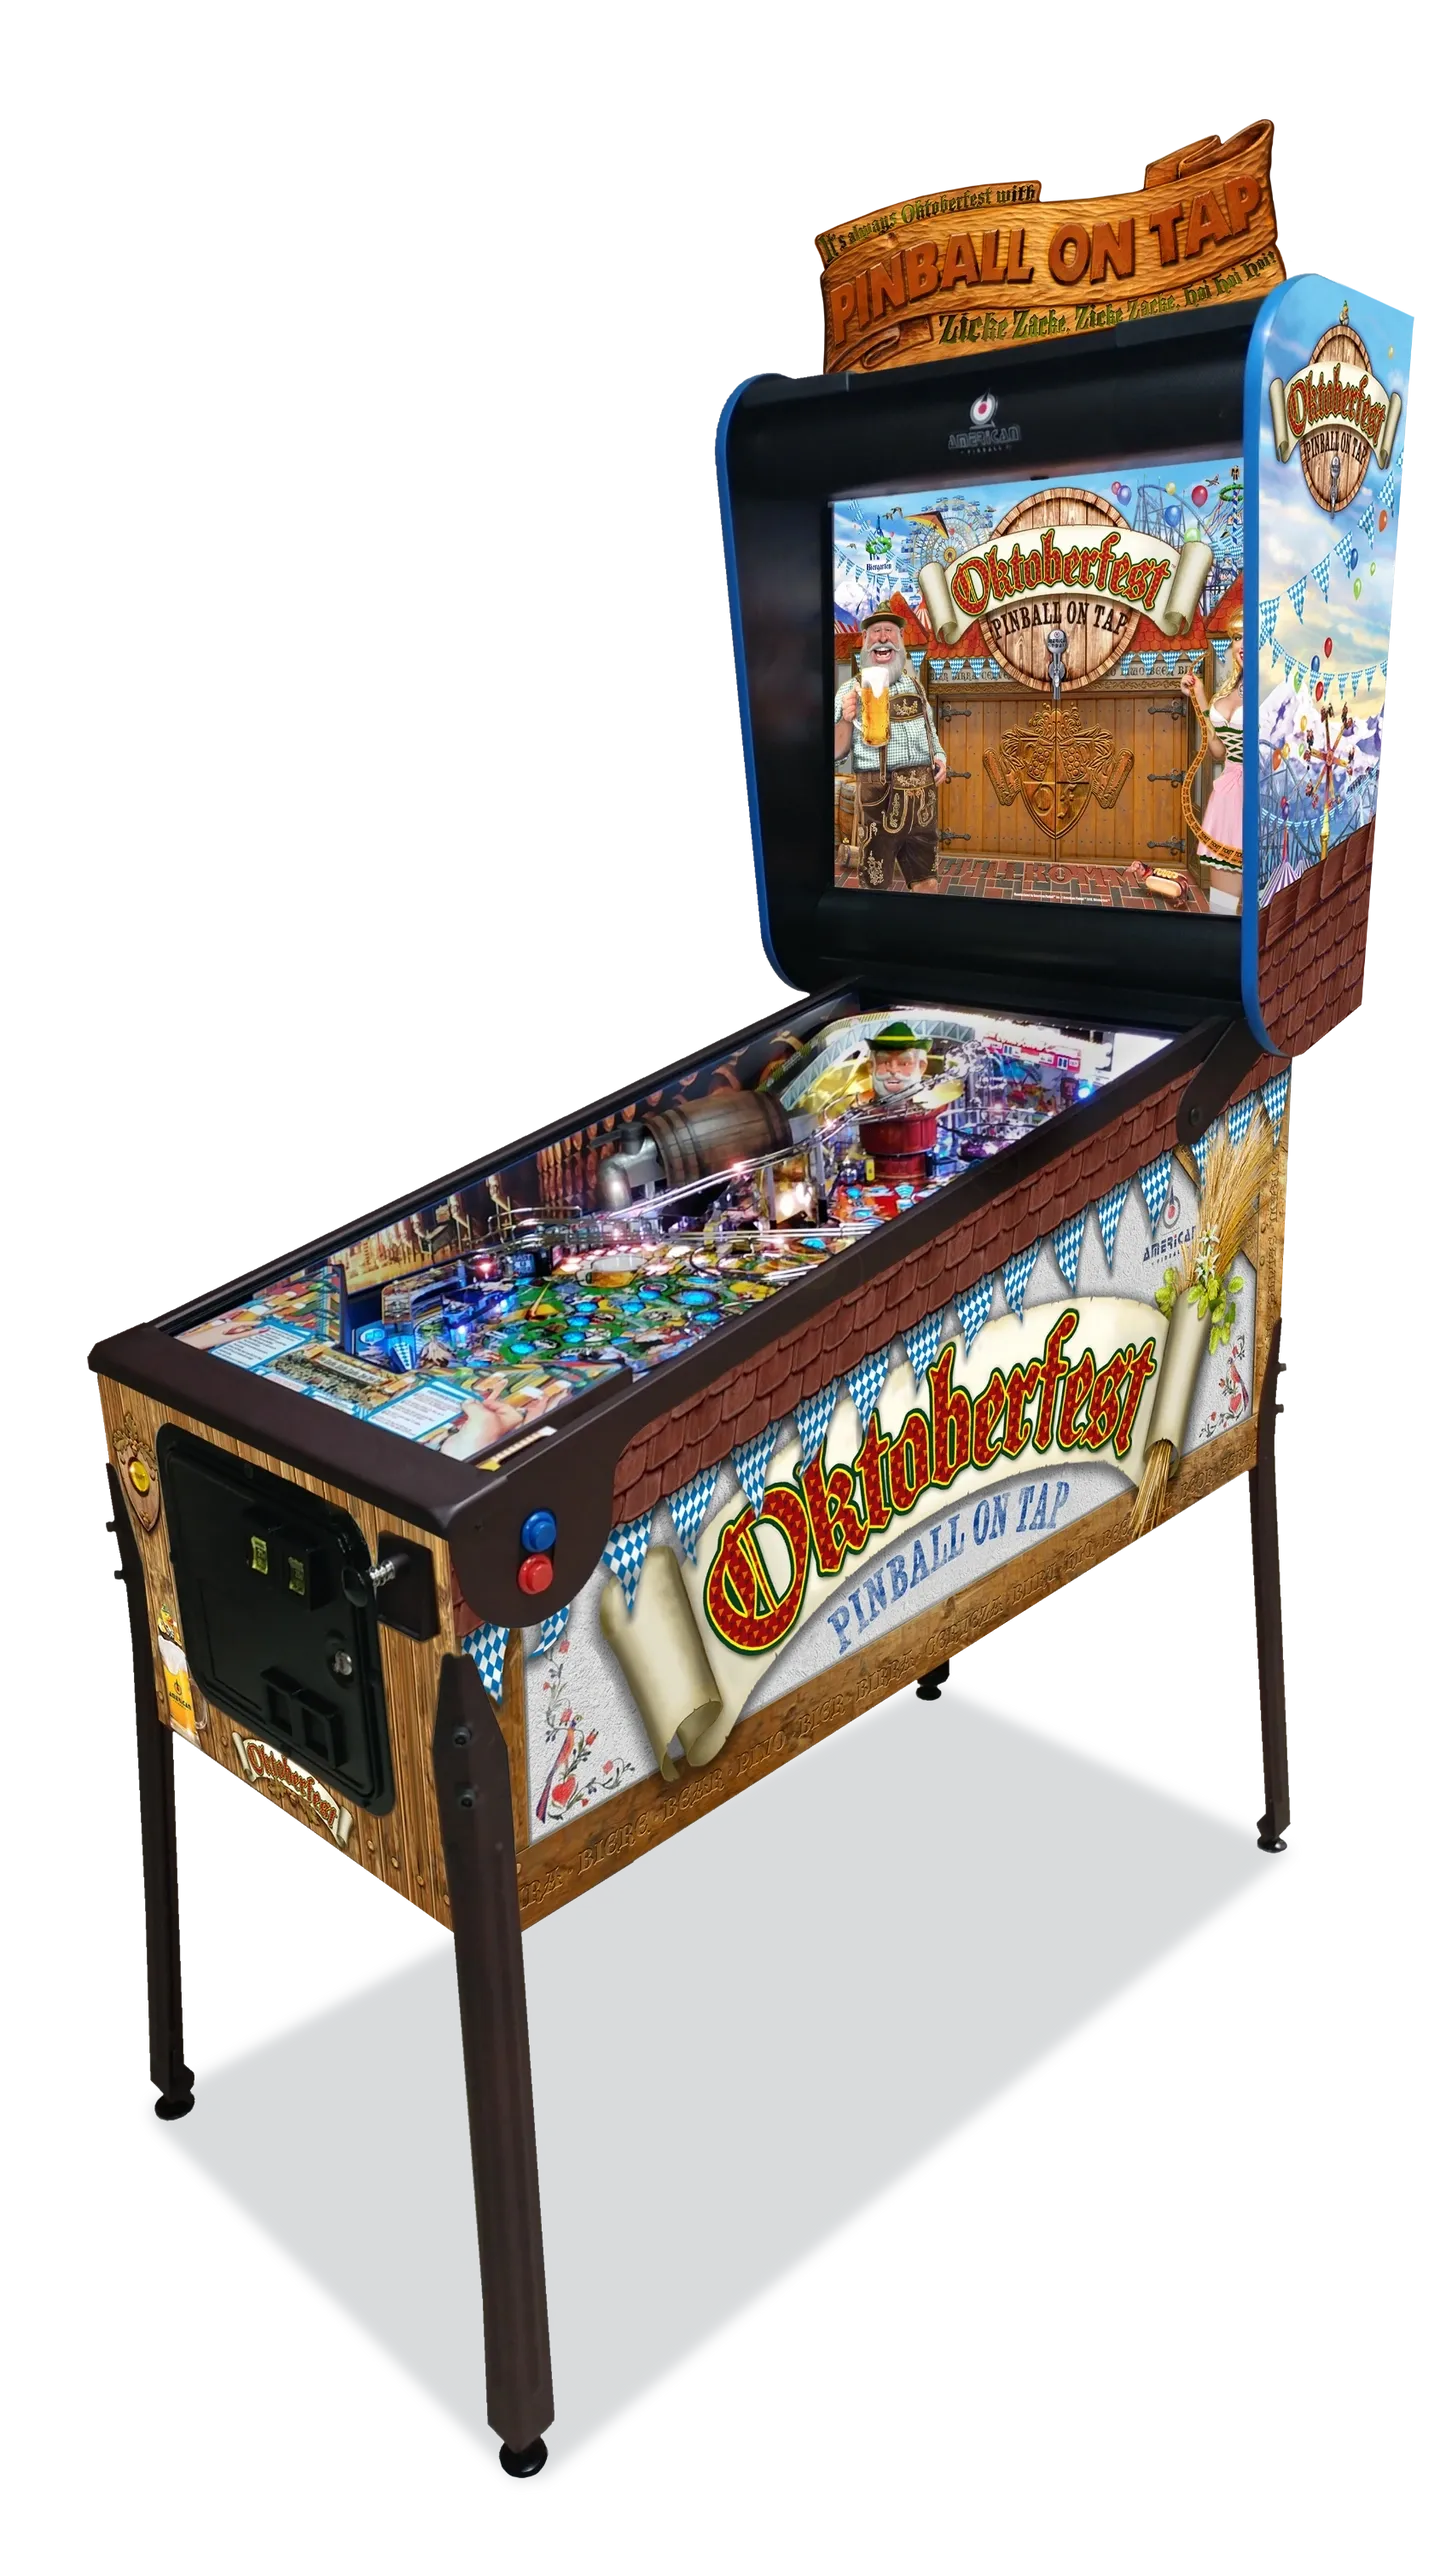 A pinball machine with many different games on it.